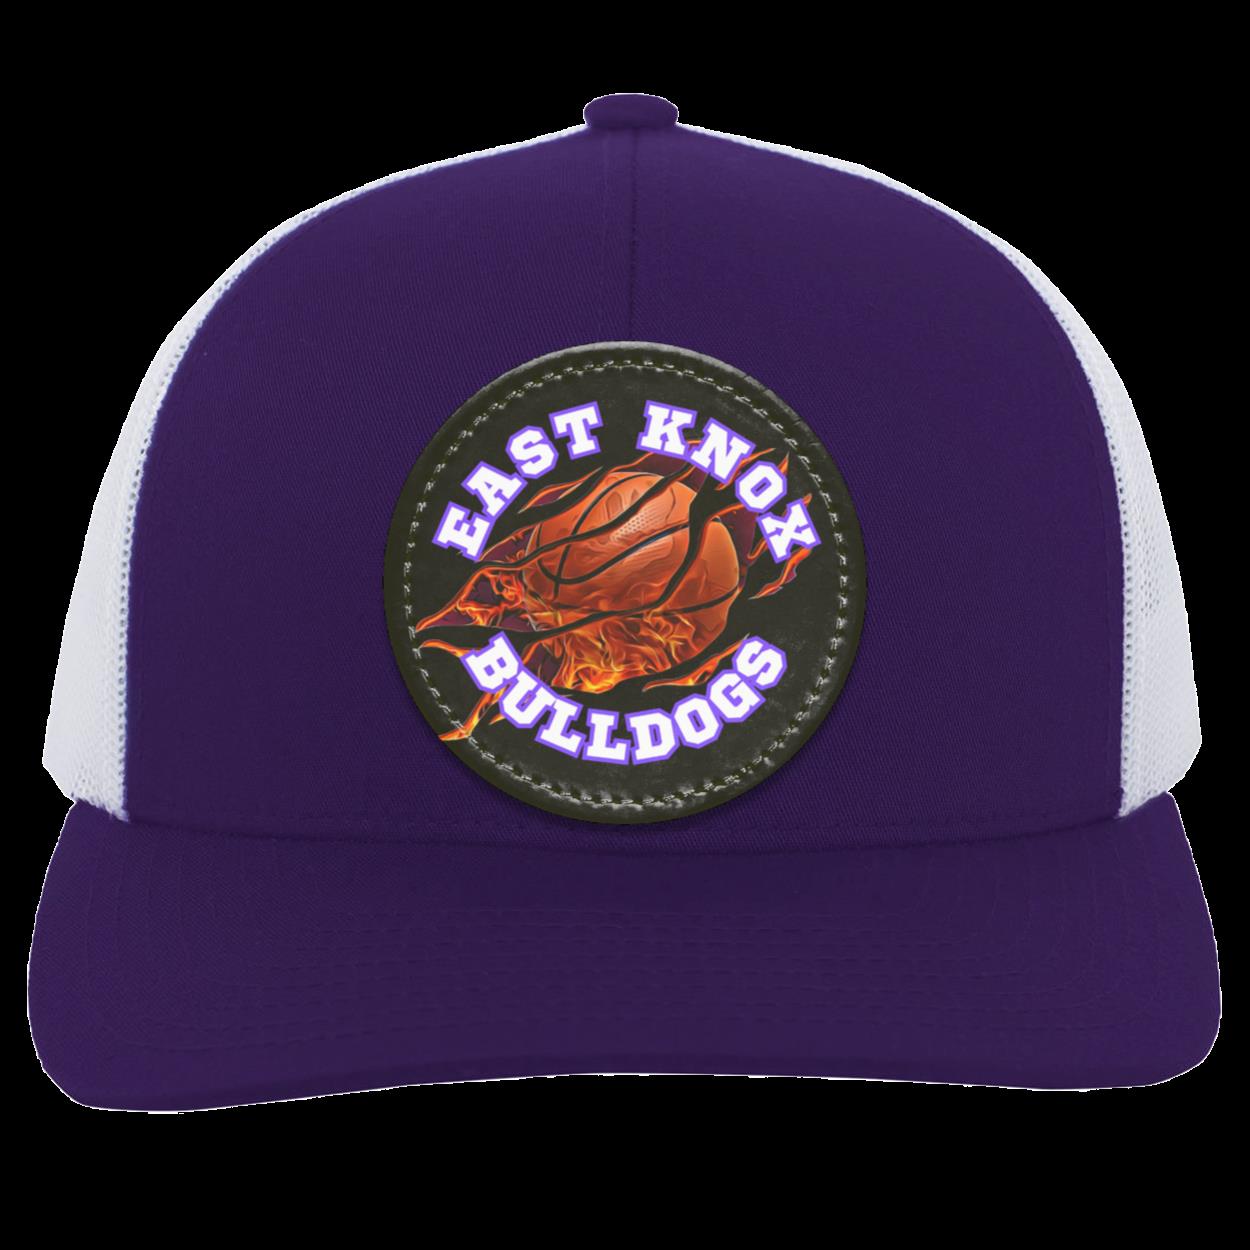 East Knox Basketball 104C Trucker Snap Back - Patch